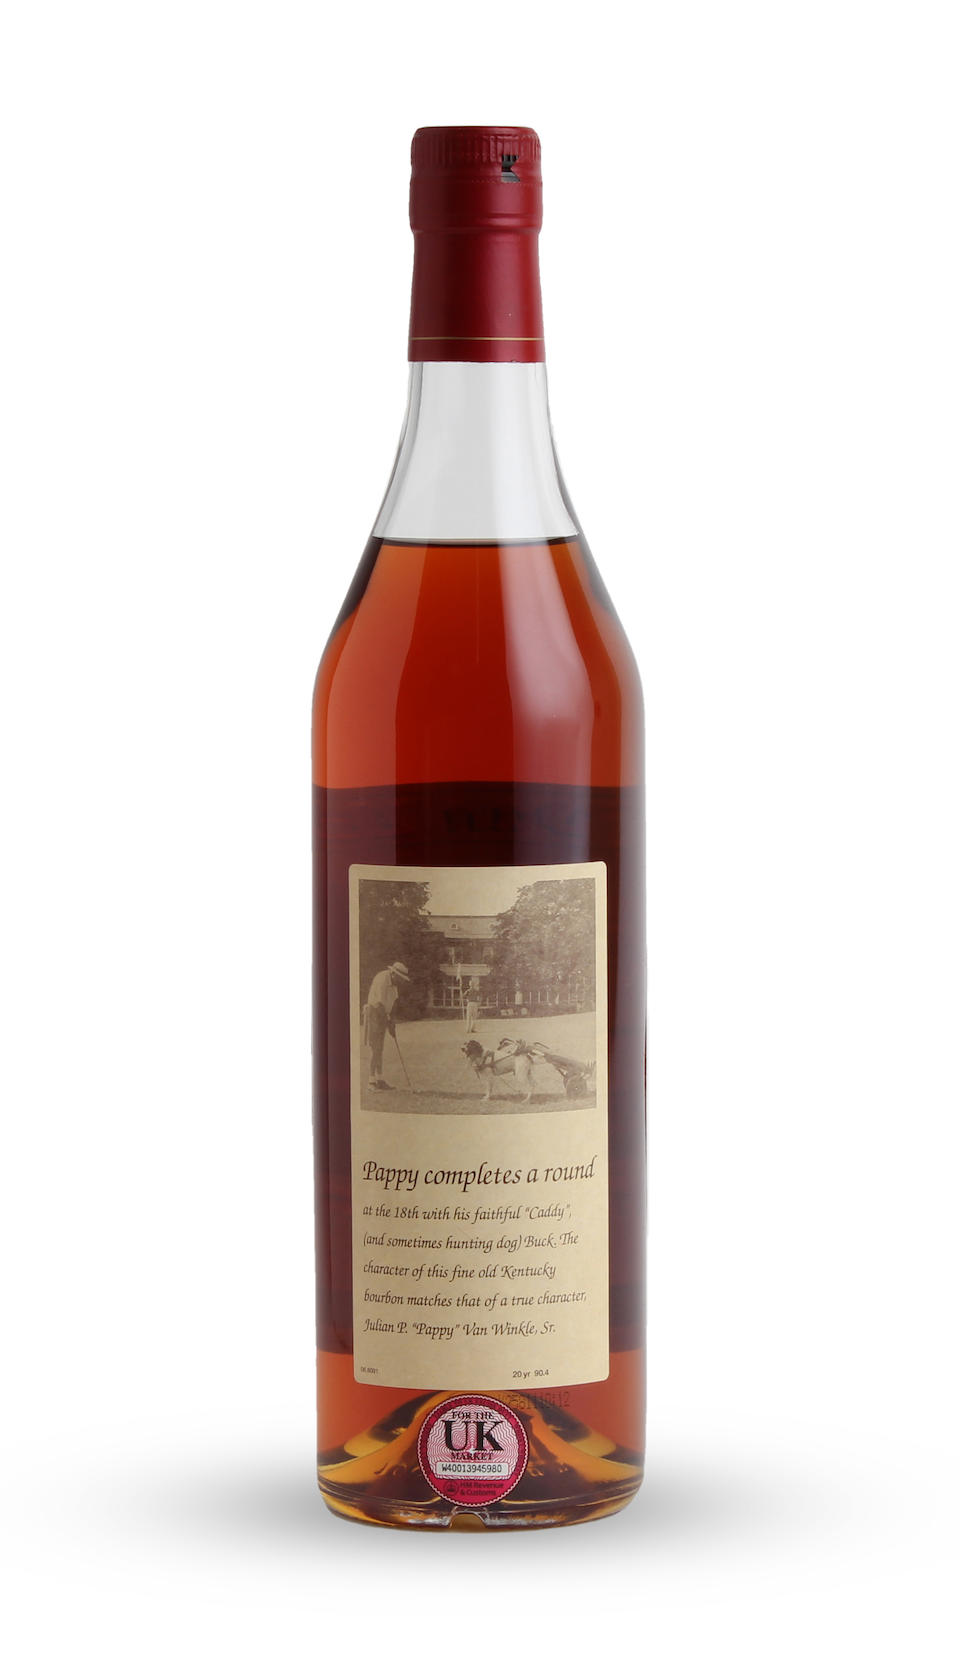 Pappy Van Winkle Family Reserve-20 year old